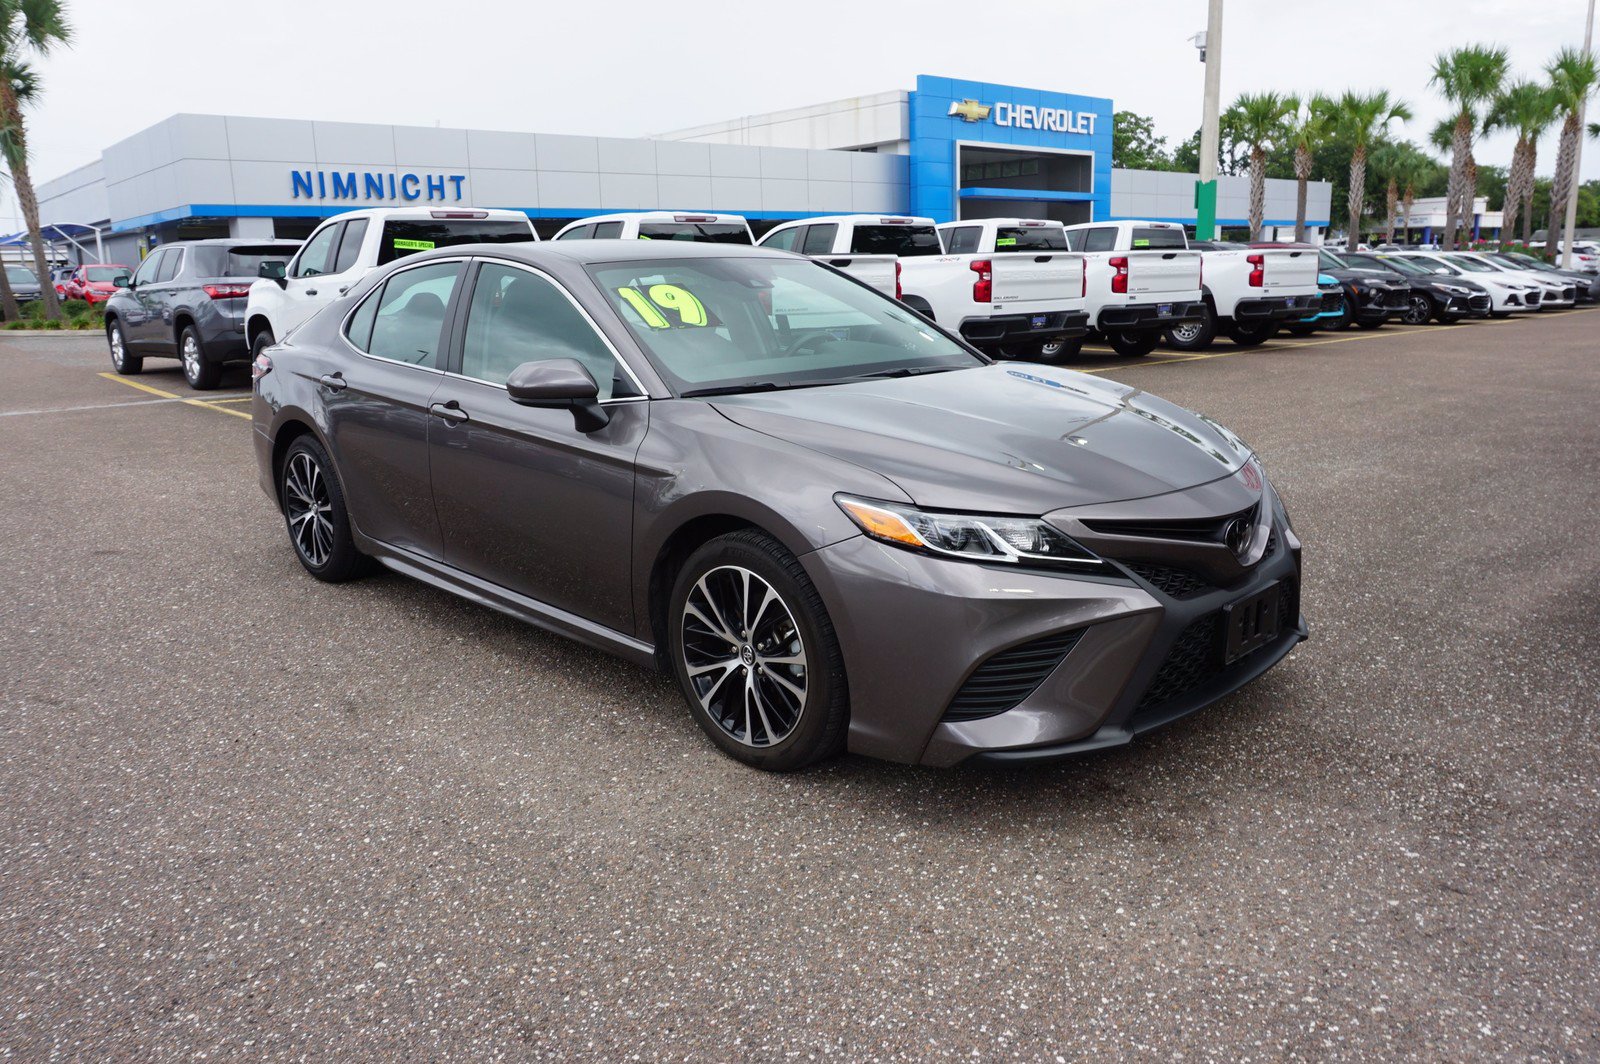 PreOwned 2019 Toyota Camry SE FWD 4dr Car